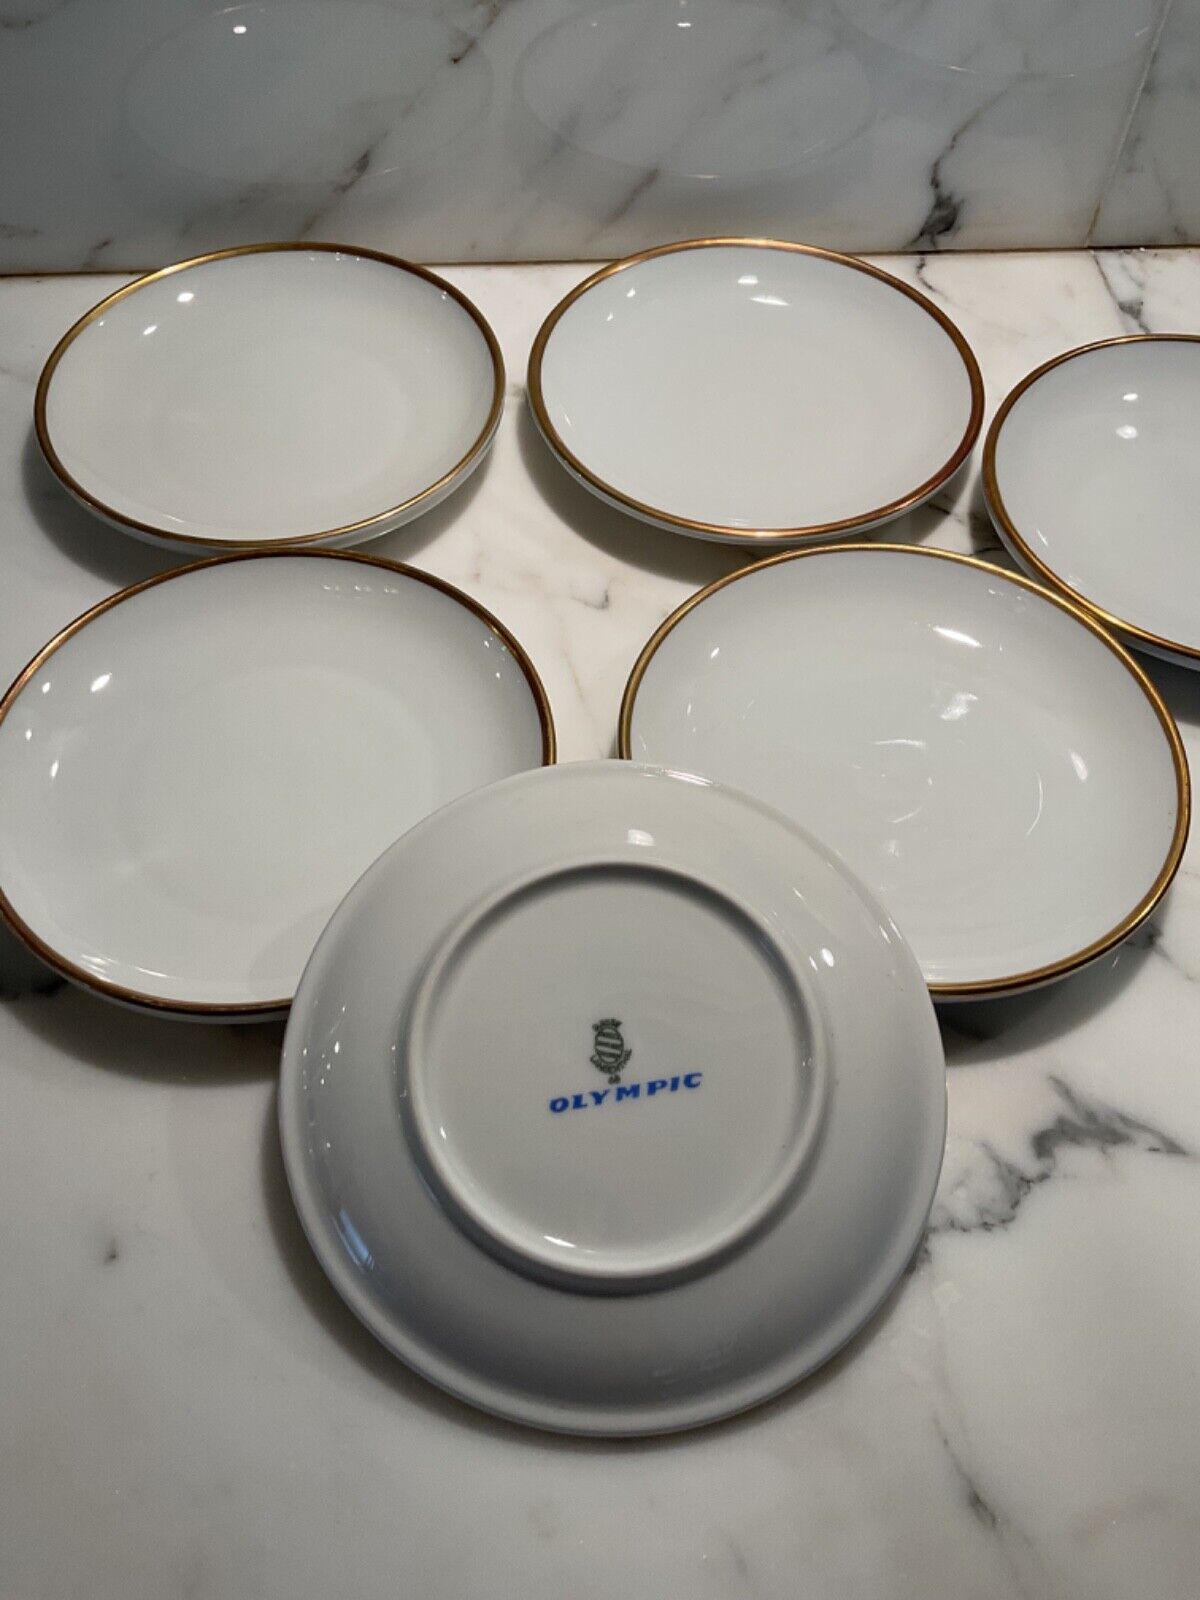 6 collectible plates by Olympic Airways 1970-1980 made by Swiss porcelain